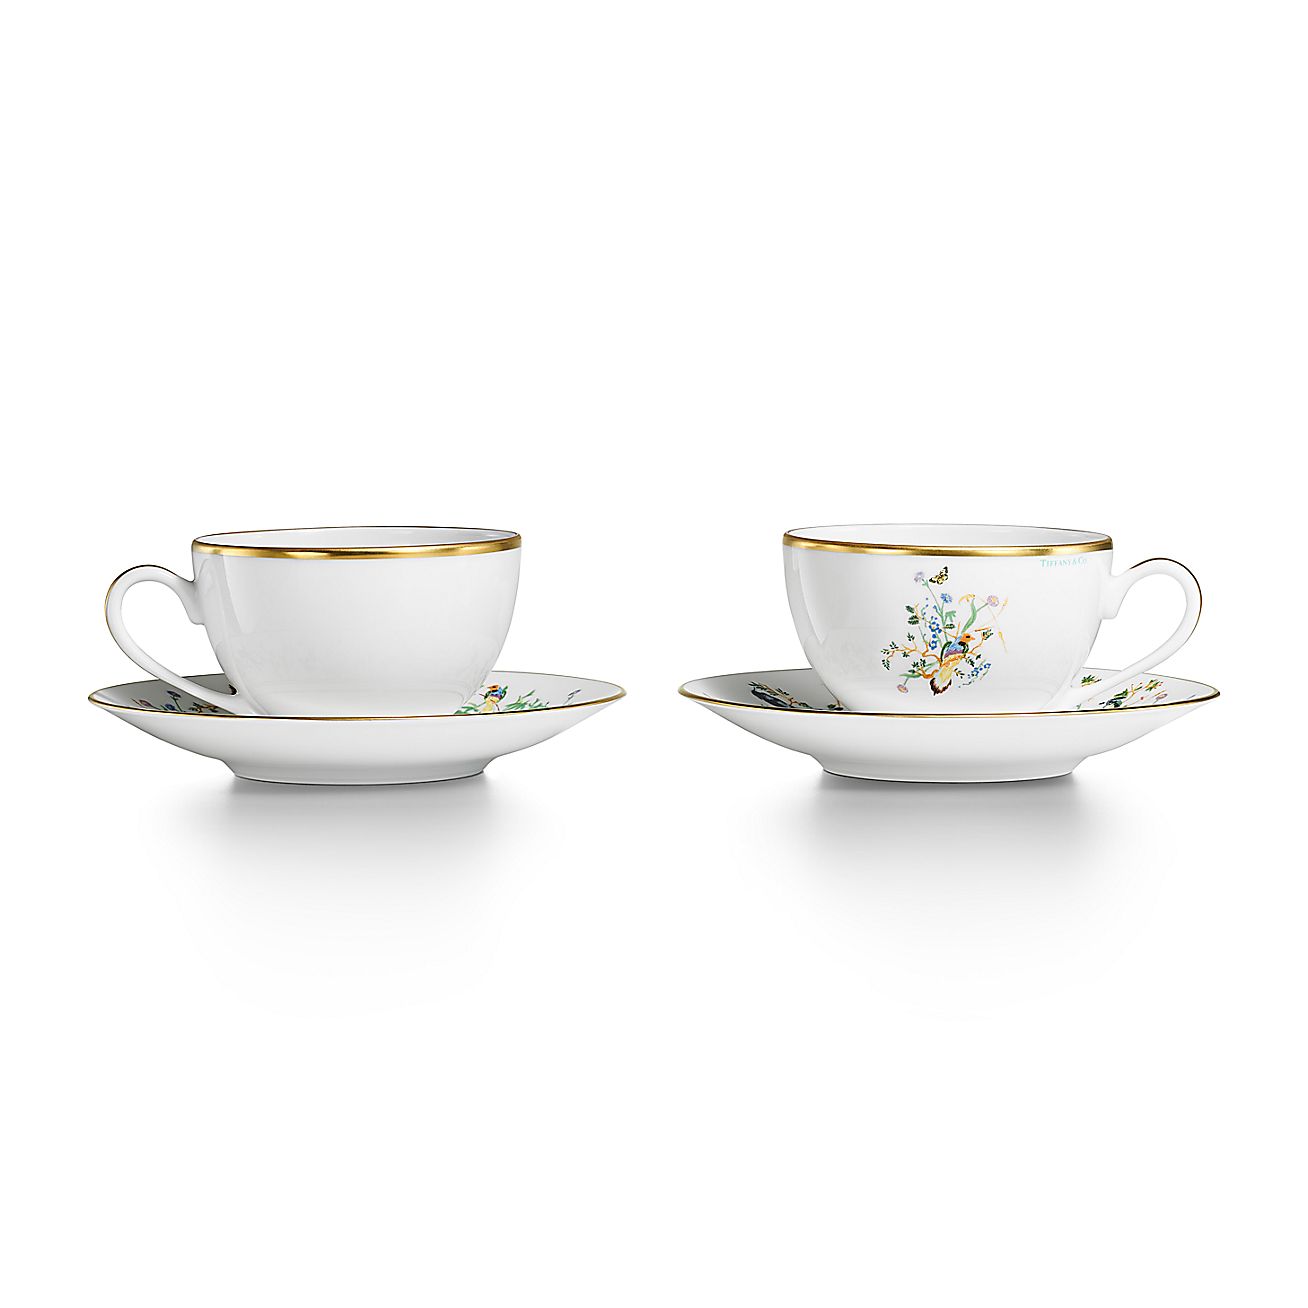 Tiffany Jardin Teacup and Saucer in Porcelain, Set of Two